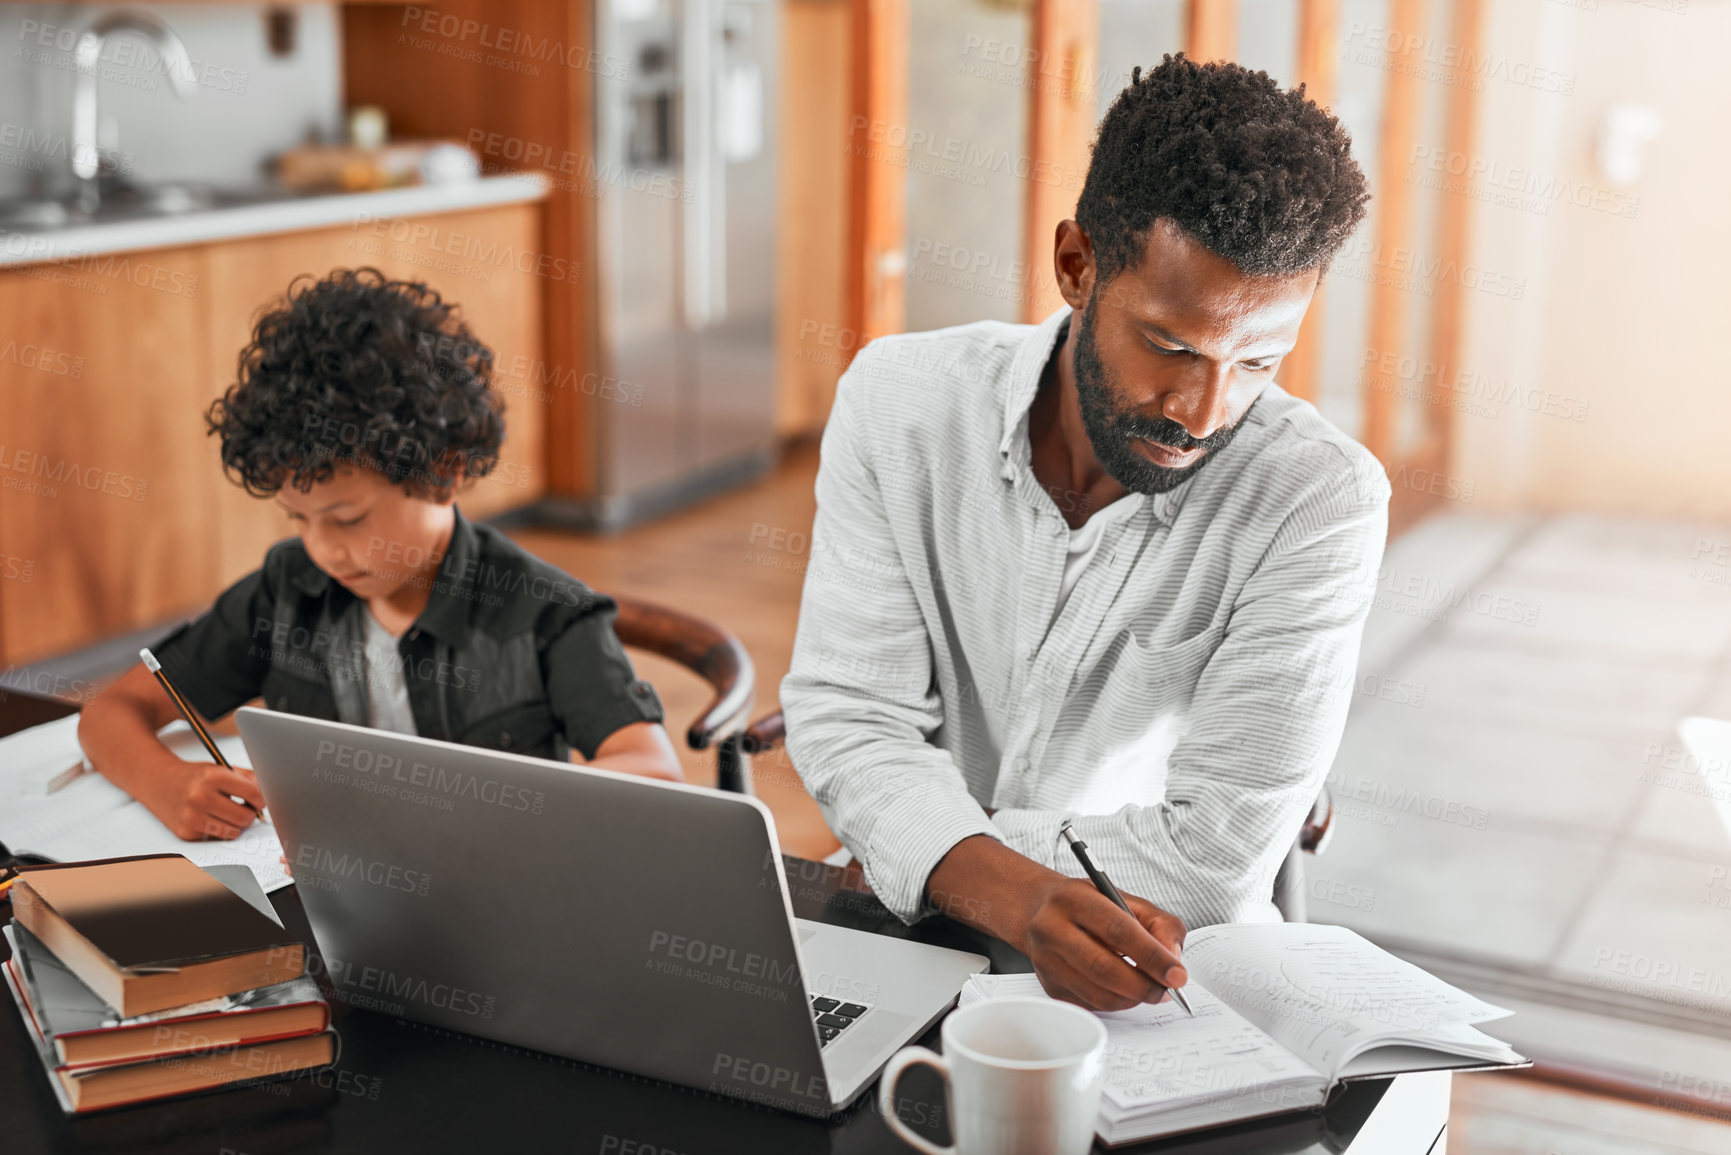 Buy stock photo Shot of a man using his laptop while sitting with his son